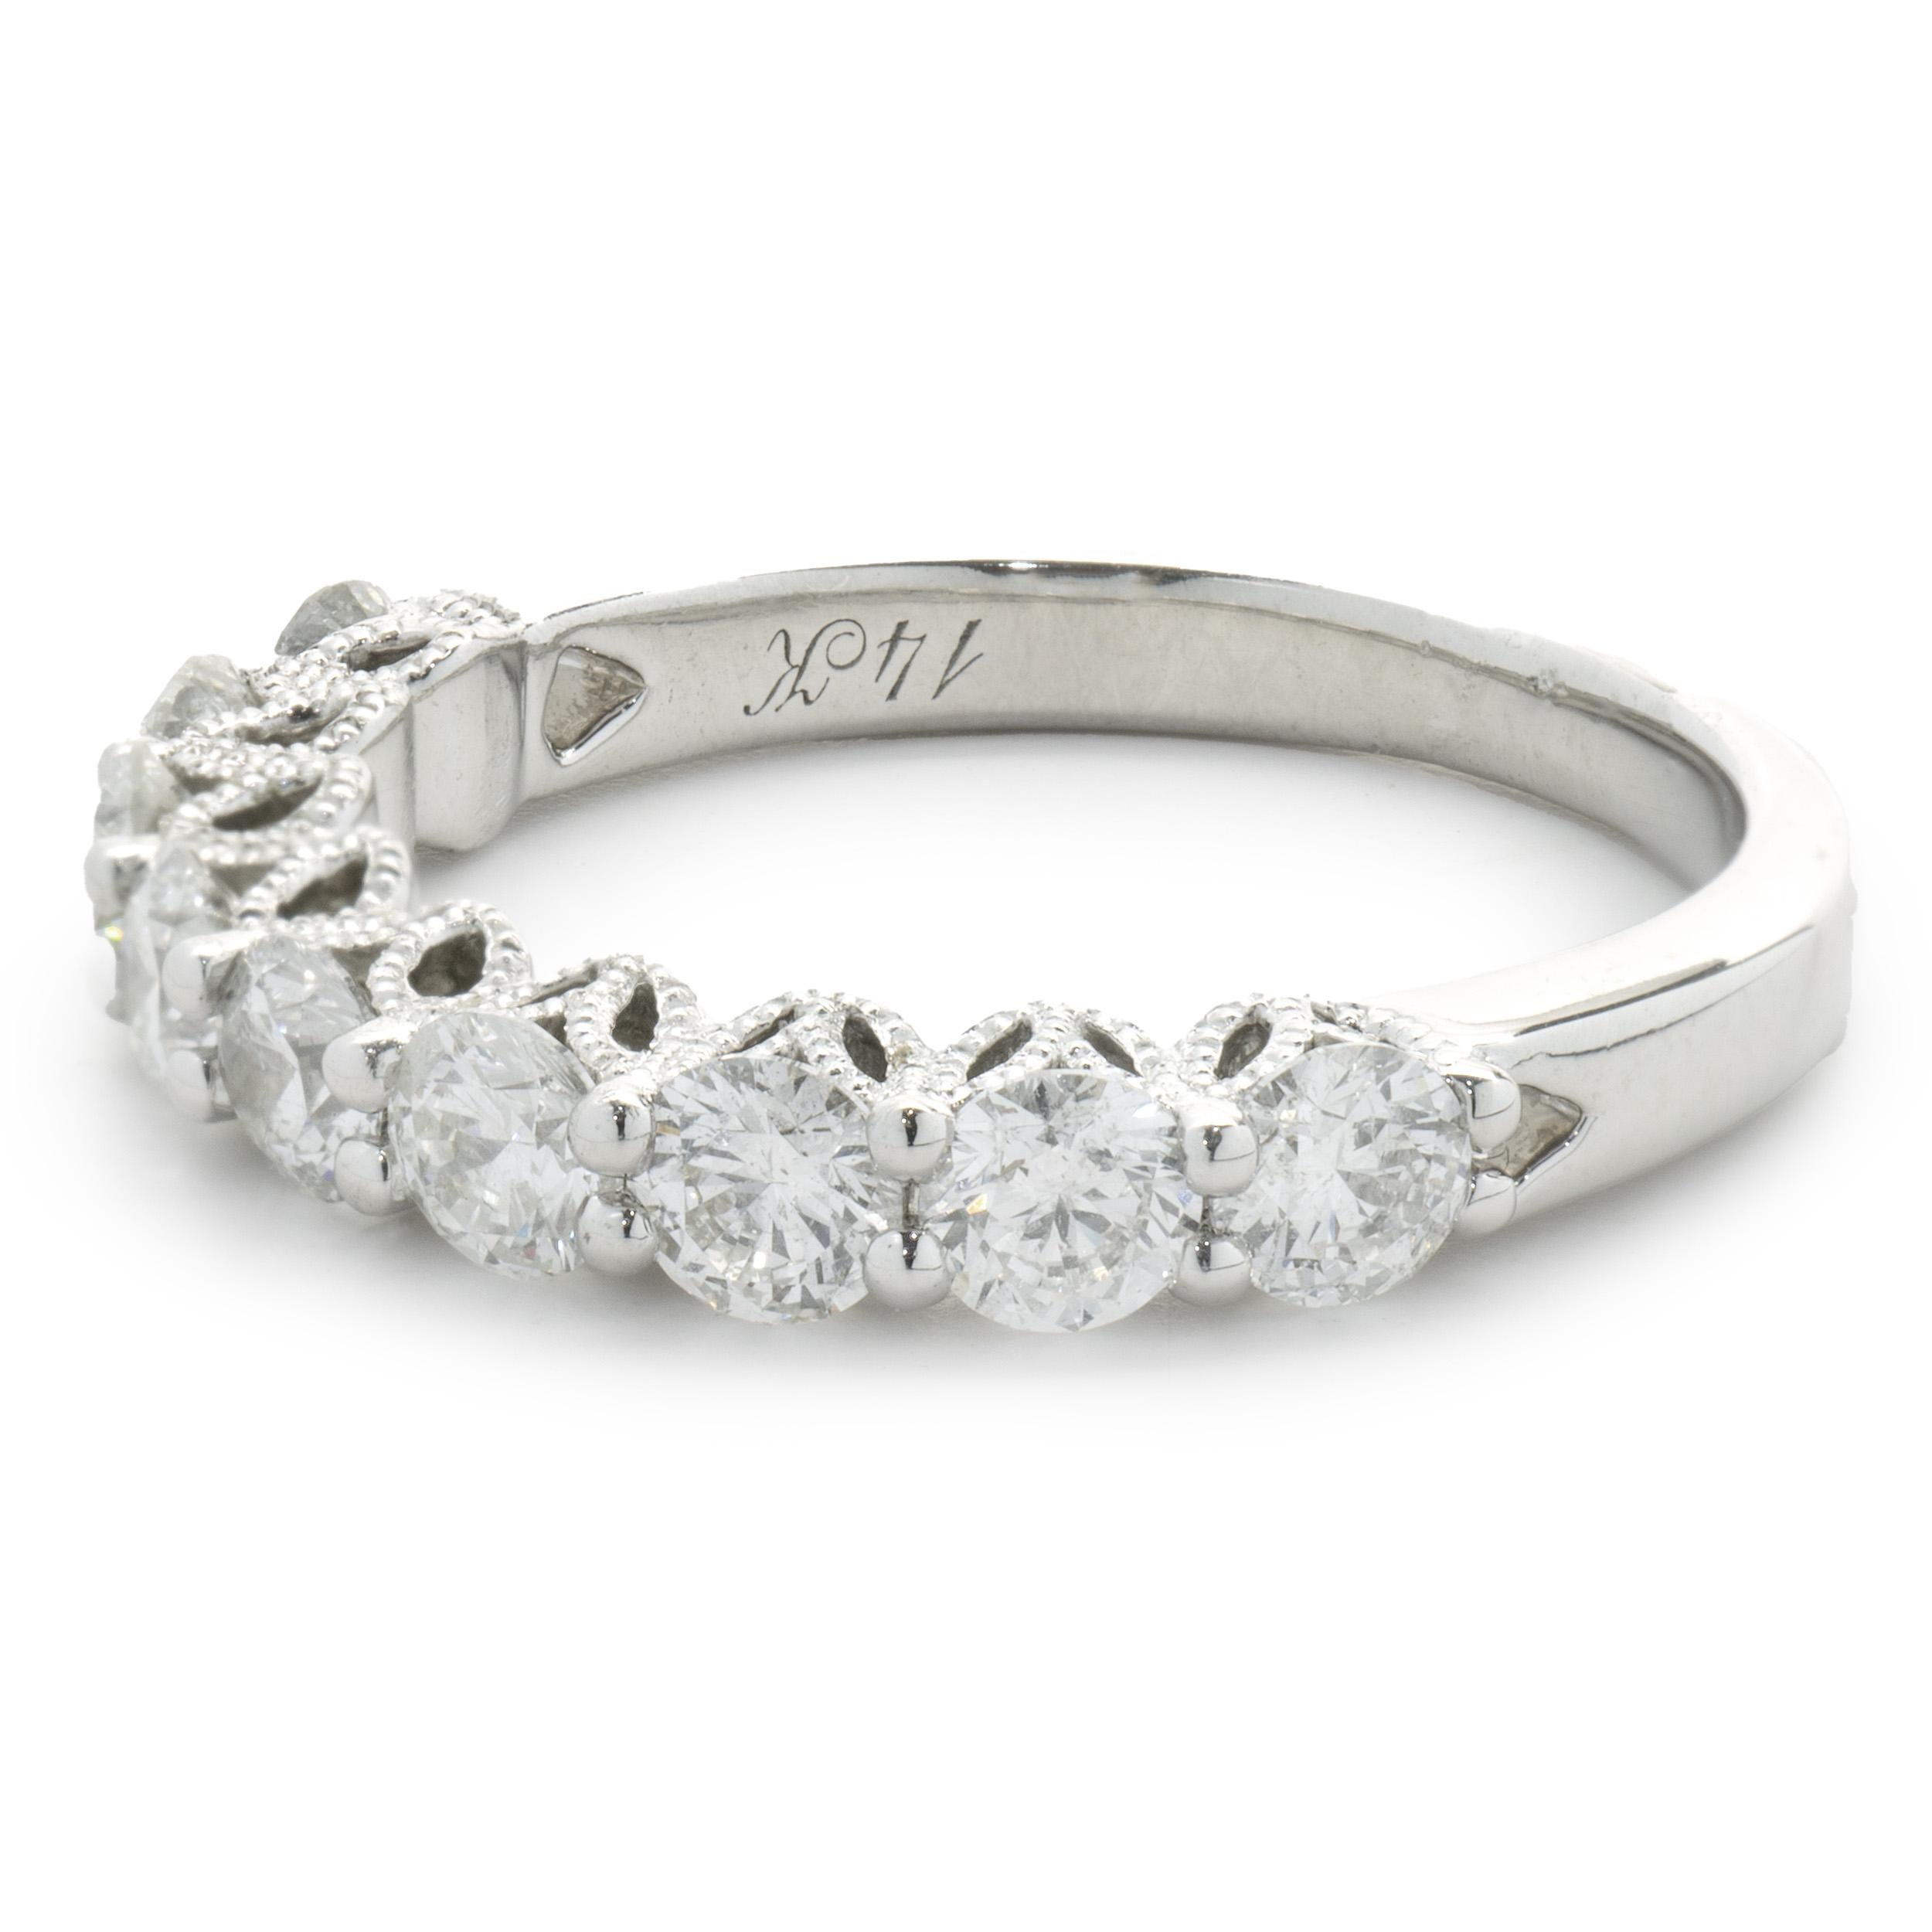 Designer: Neil Lane
Material: 14K white gold
Diamonds: 9 round brilliant cut = 1.53cttw
Color: G
Clarity: VS1-2
Size: 7.75 sizing available 
Dimensions: ring measures 3mm in width
Weight: 3.86 grams